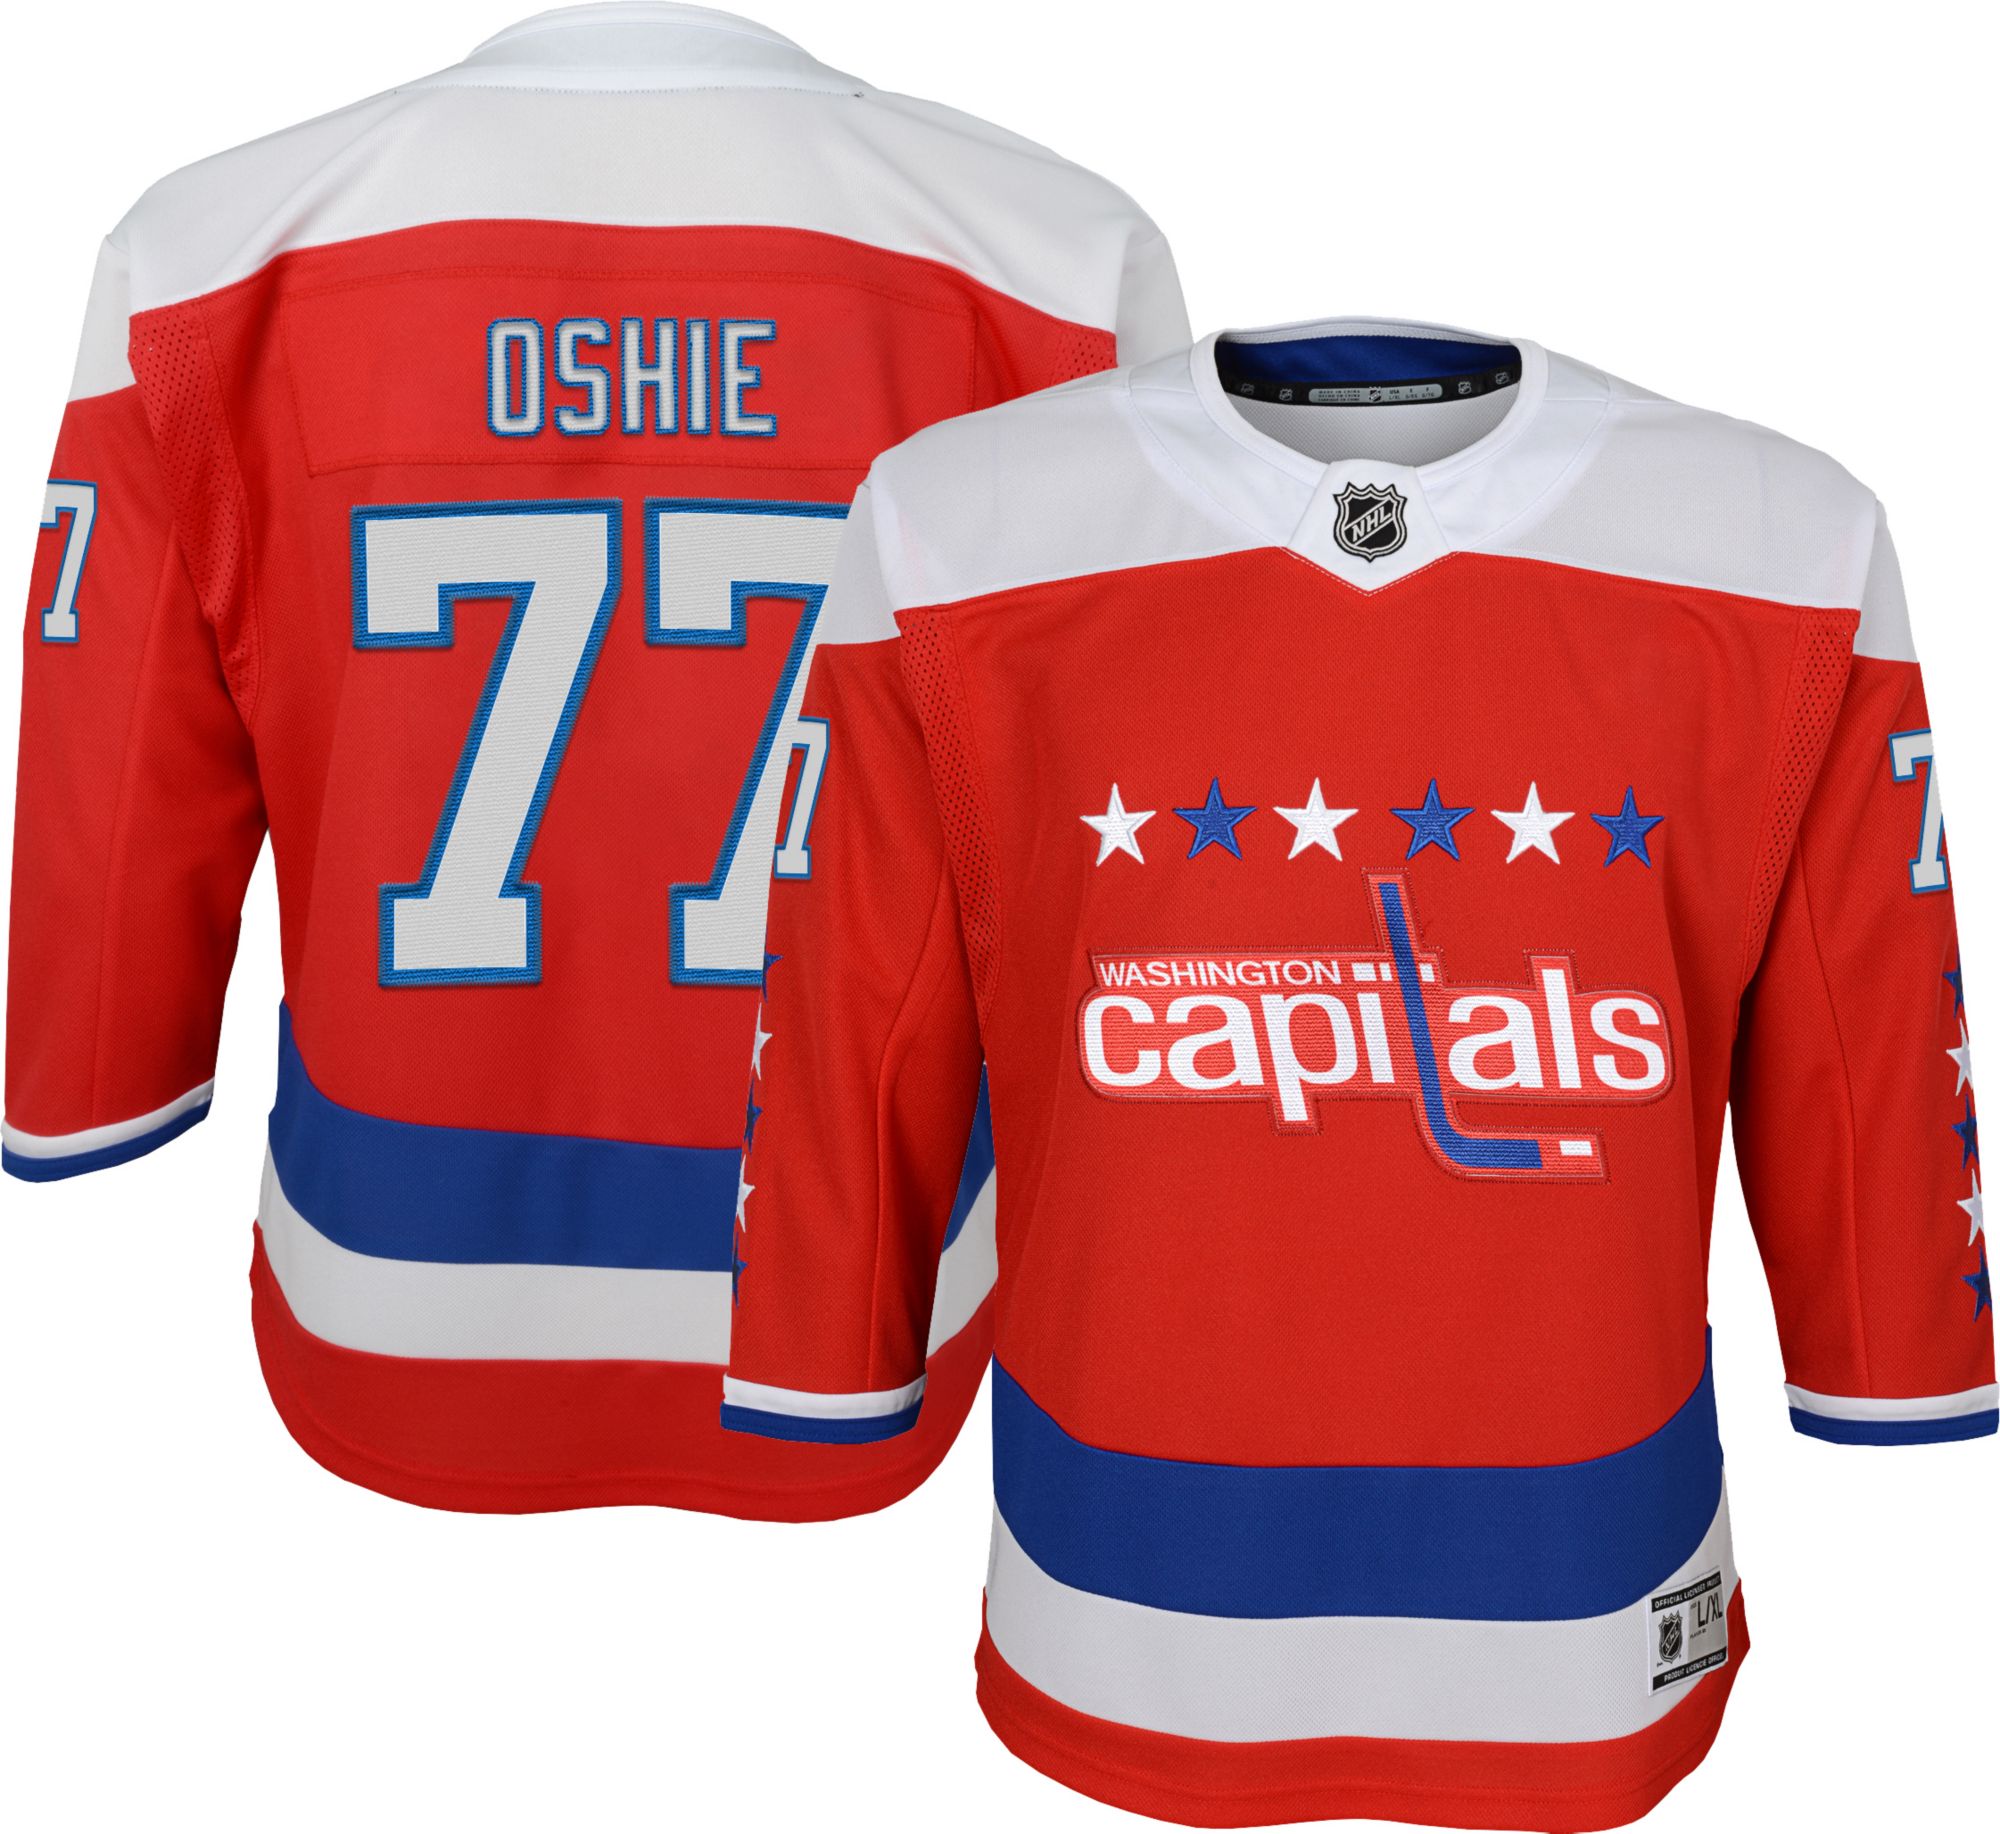 tj oshie youth jersey